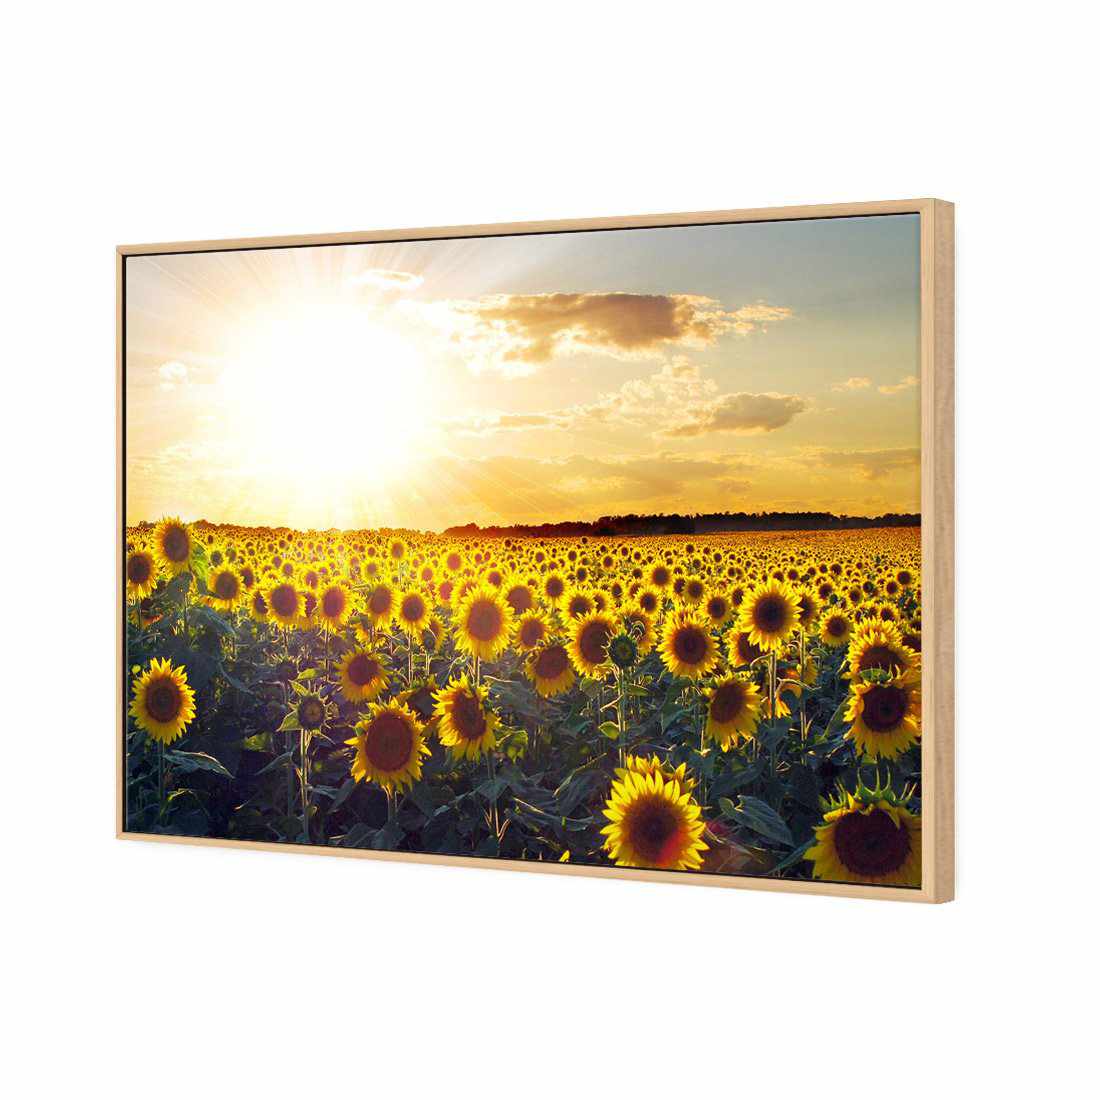 Sunflowers At Sunset Canvas Art-Canvas-Wall Art Designs-45x30cm-Canvas - Oak Frame-Wall Art Designs